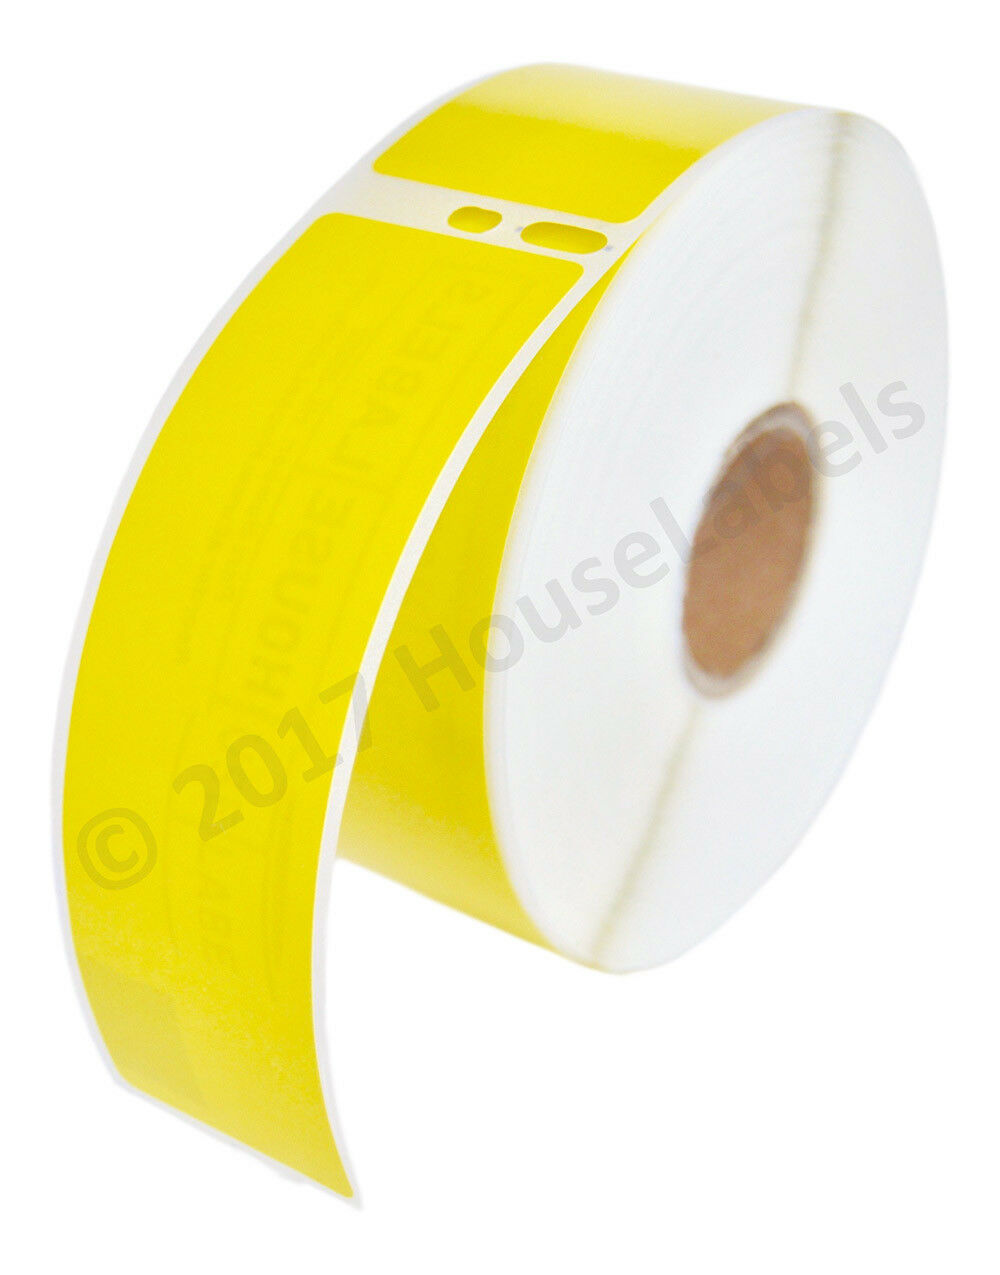 DYMO LW 30252 YELLOW Address Labels for LabelWriter – 2 Rolls of 350 ...